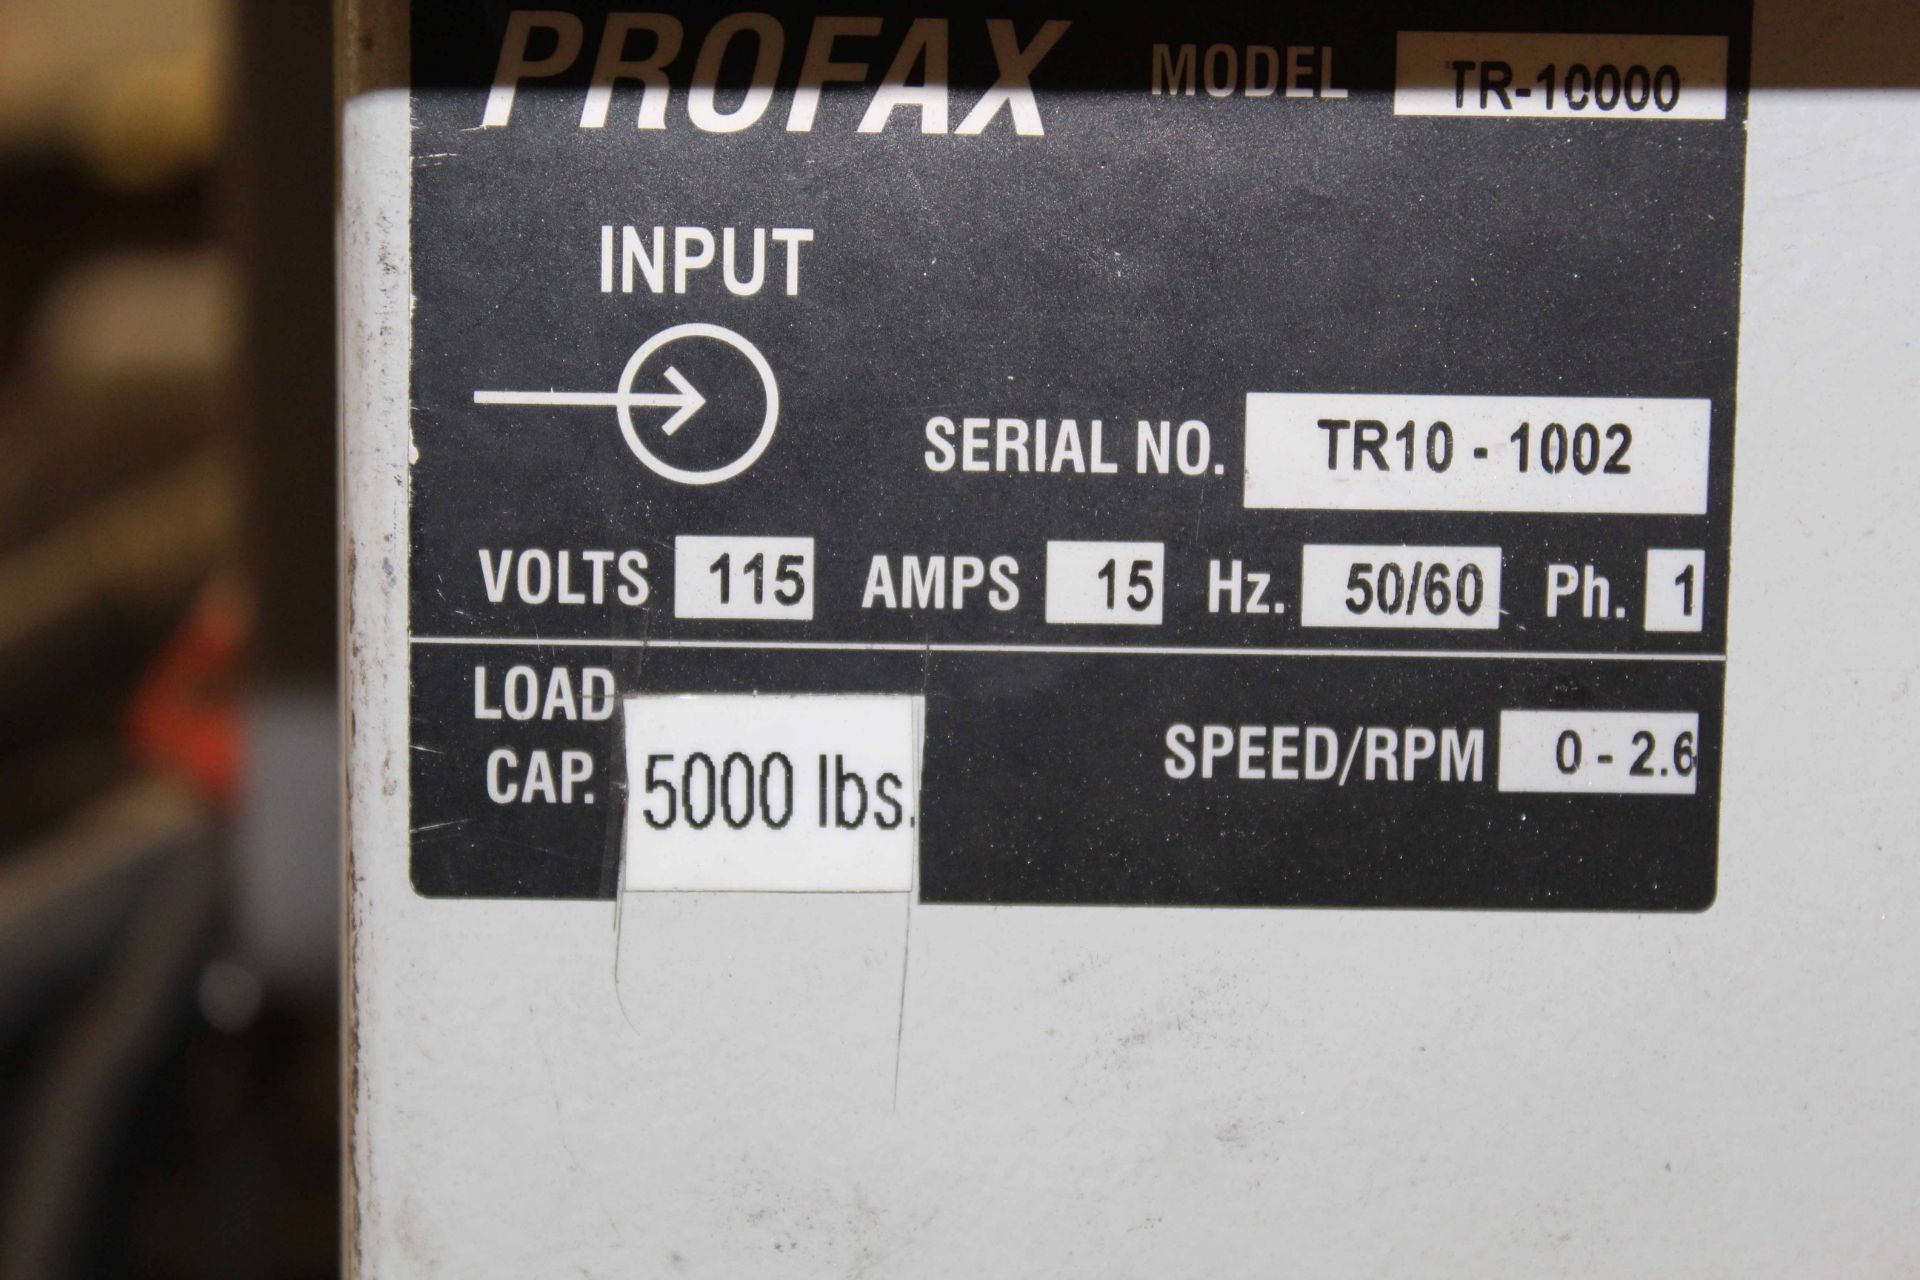 POWER TANK TURNING ROLL, PROFAX 5,000 LB. CAP. MDL. TR-10000, 115 v., 0 to 2.6 RPM, S/N TR10-1002 - Image 3 of 3